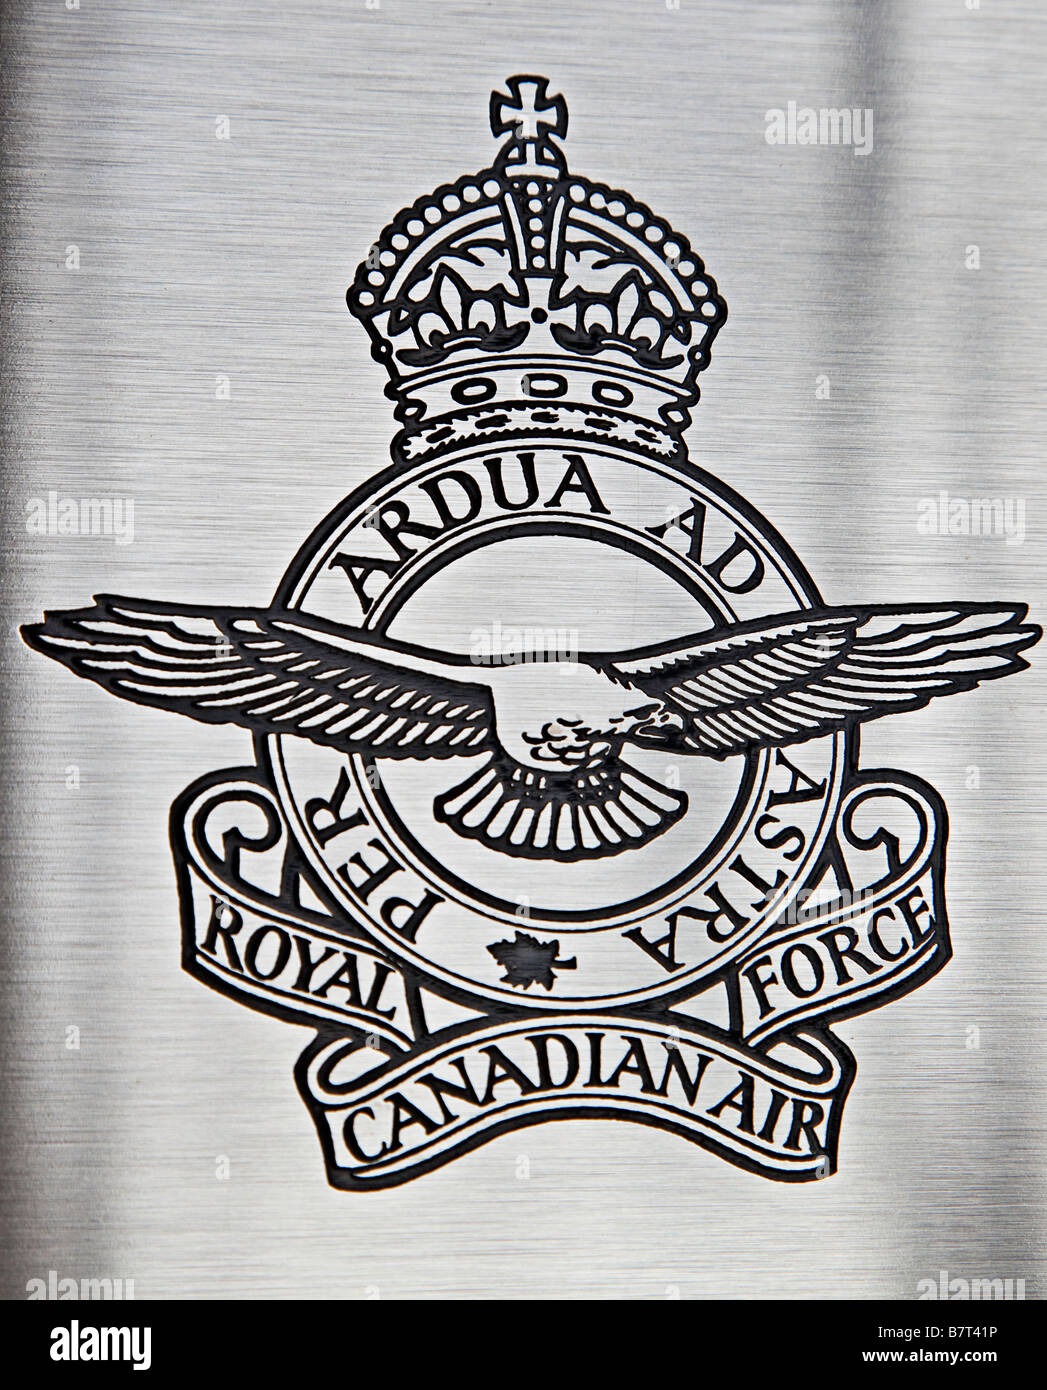 Royal Canadian Air Force Emblem - Eagle Rampant Maple Leaf - Motto Per  Ardua Ad Astra - Air Forces Memorial Runnymede Stock Photo - Alamy